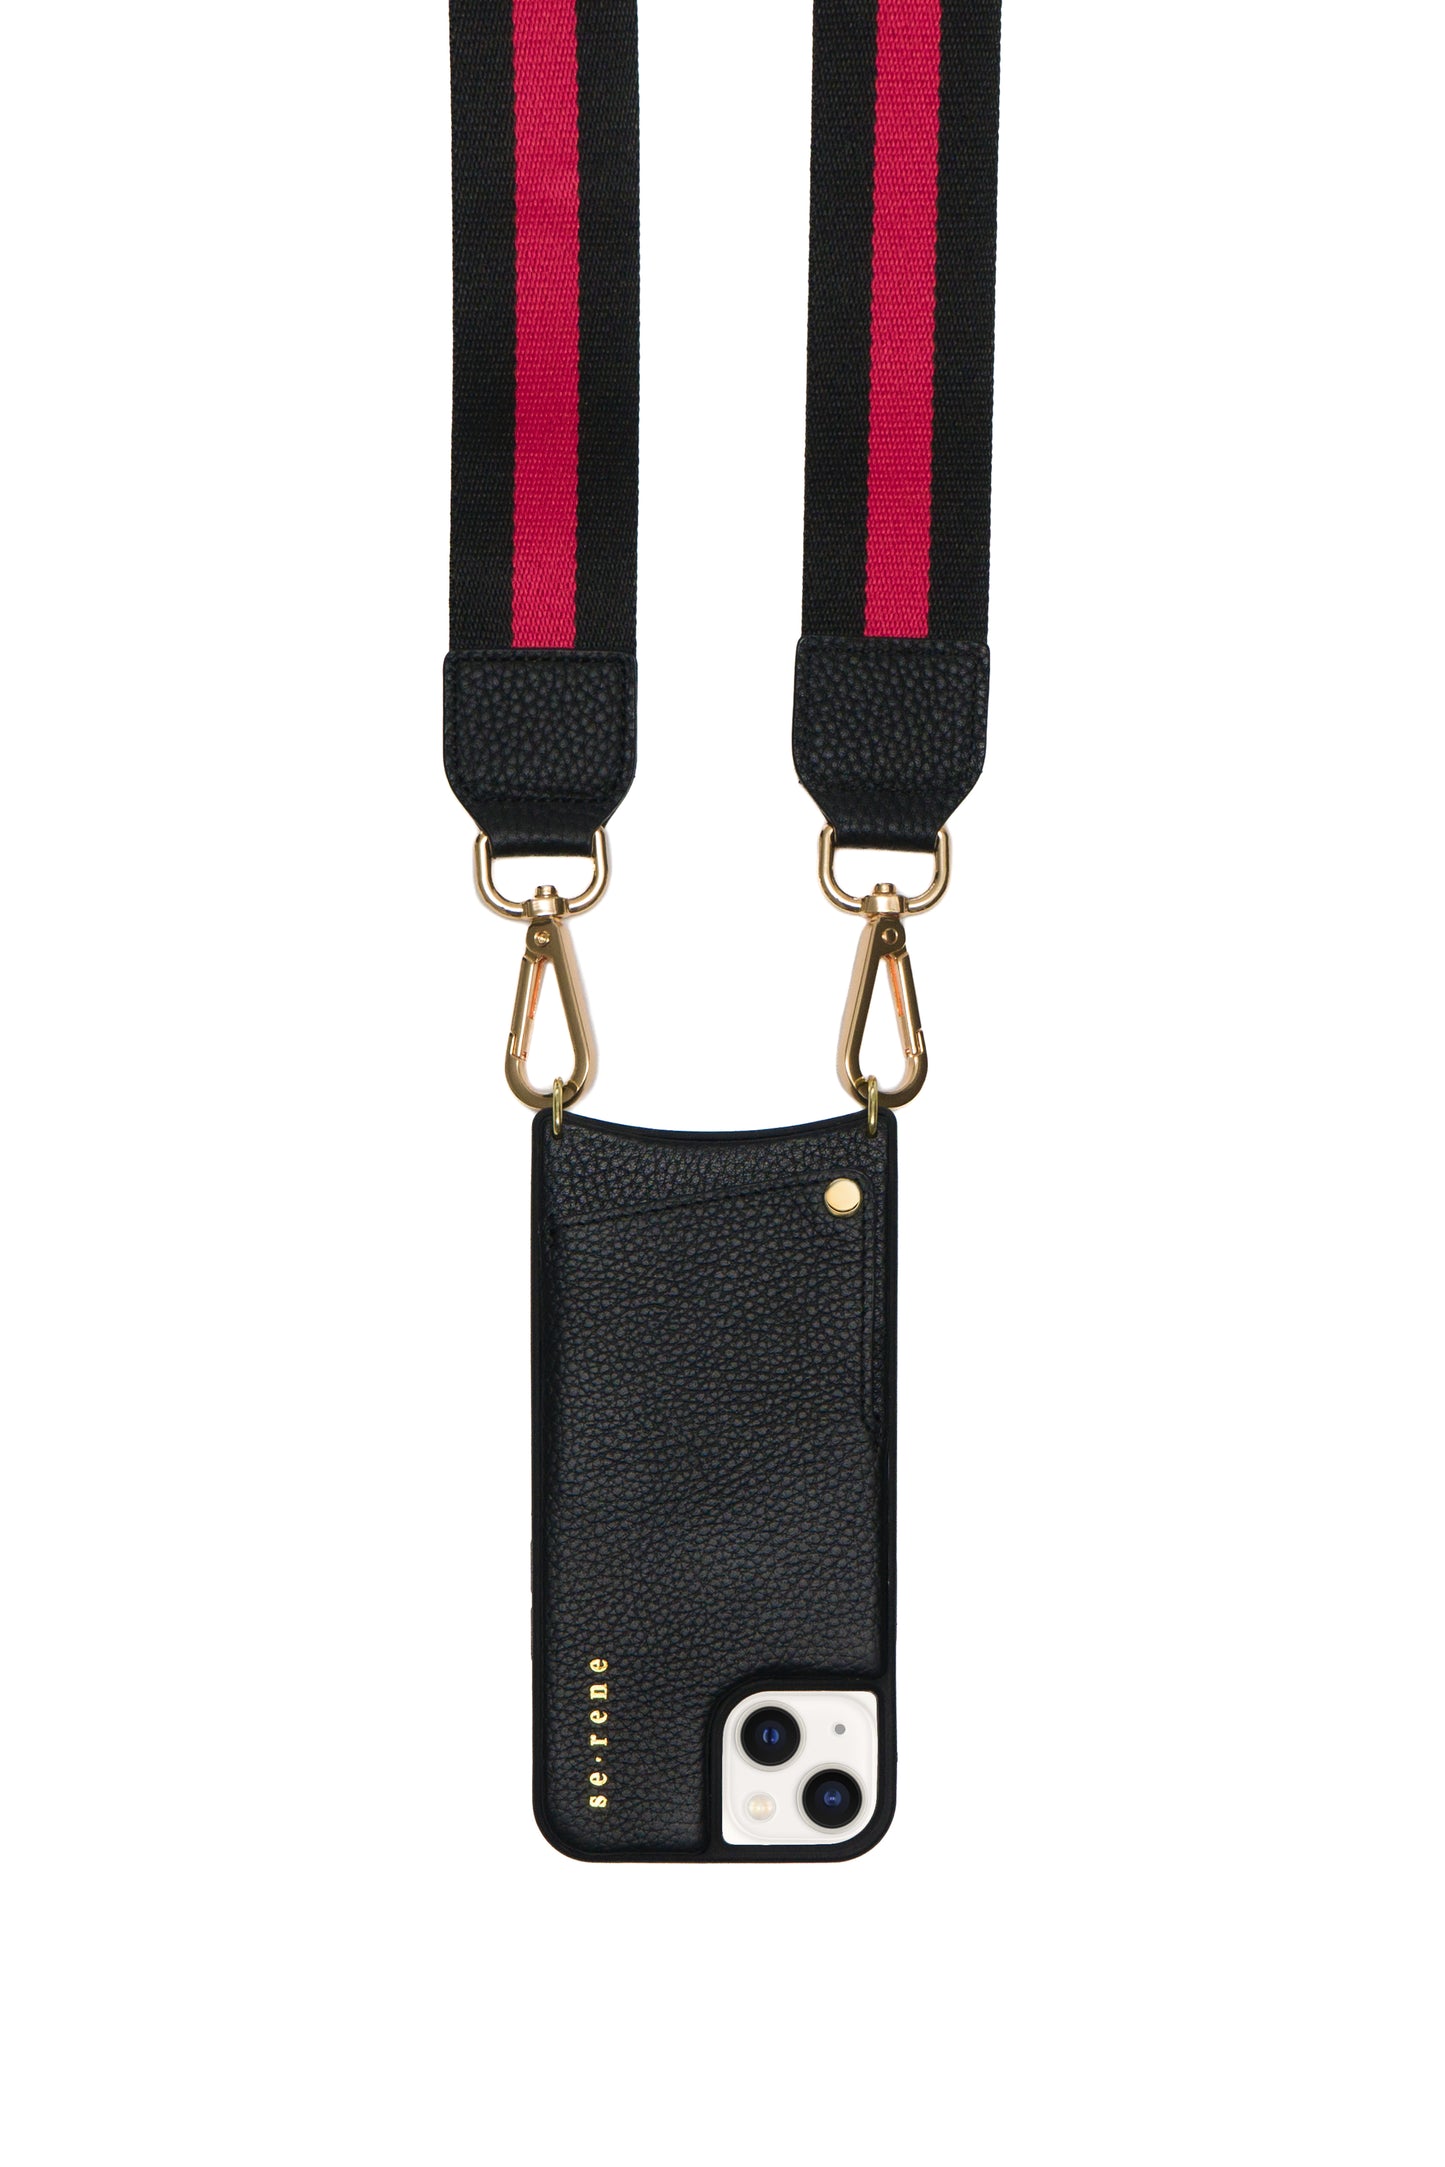 Black with Gold Pyramid Studs with Red & Black Strap